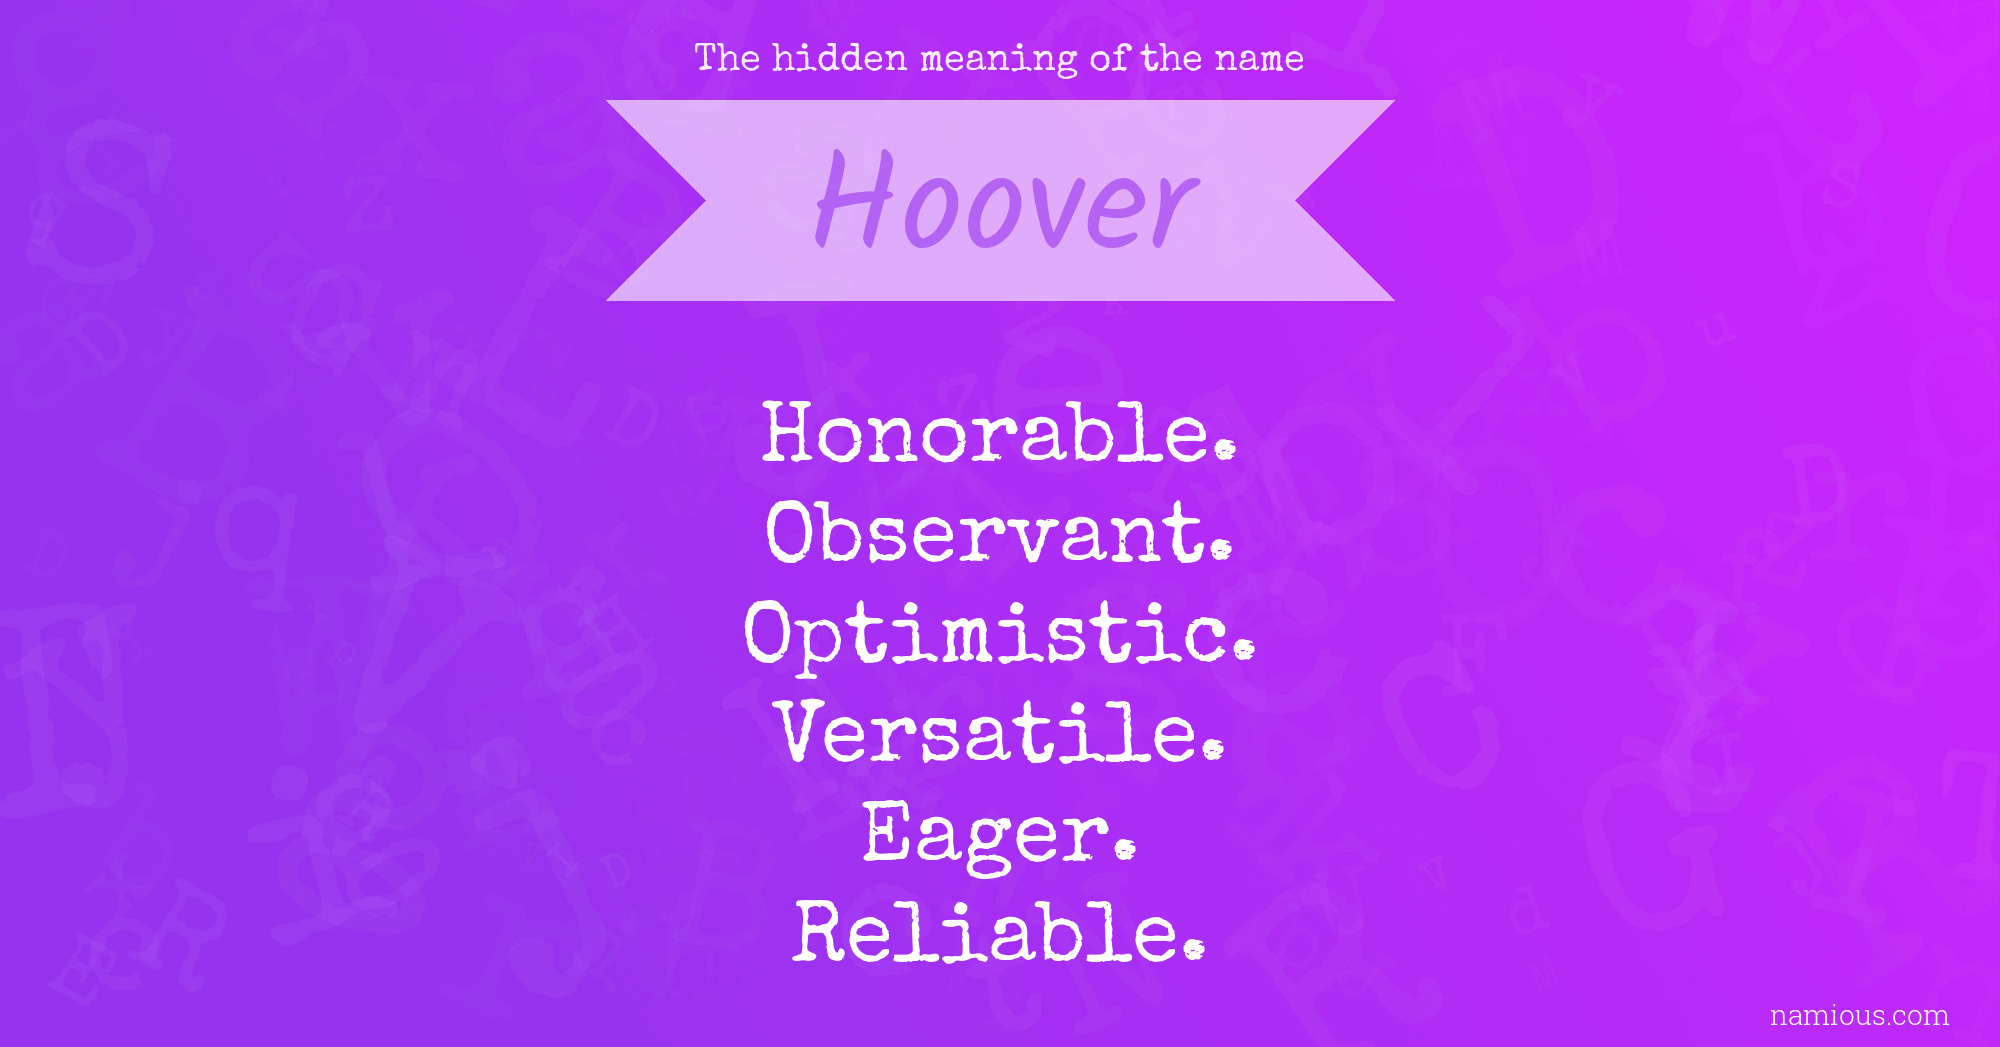 The hidden meaning of the name Hoover